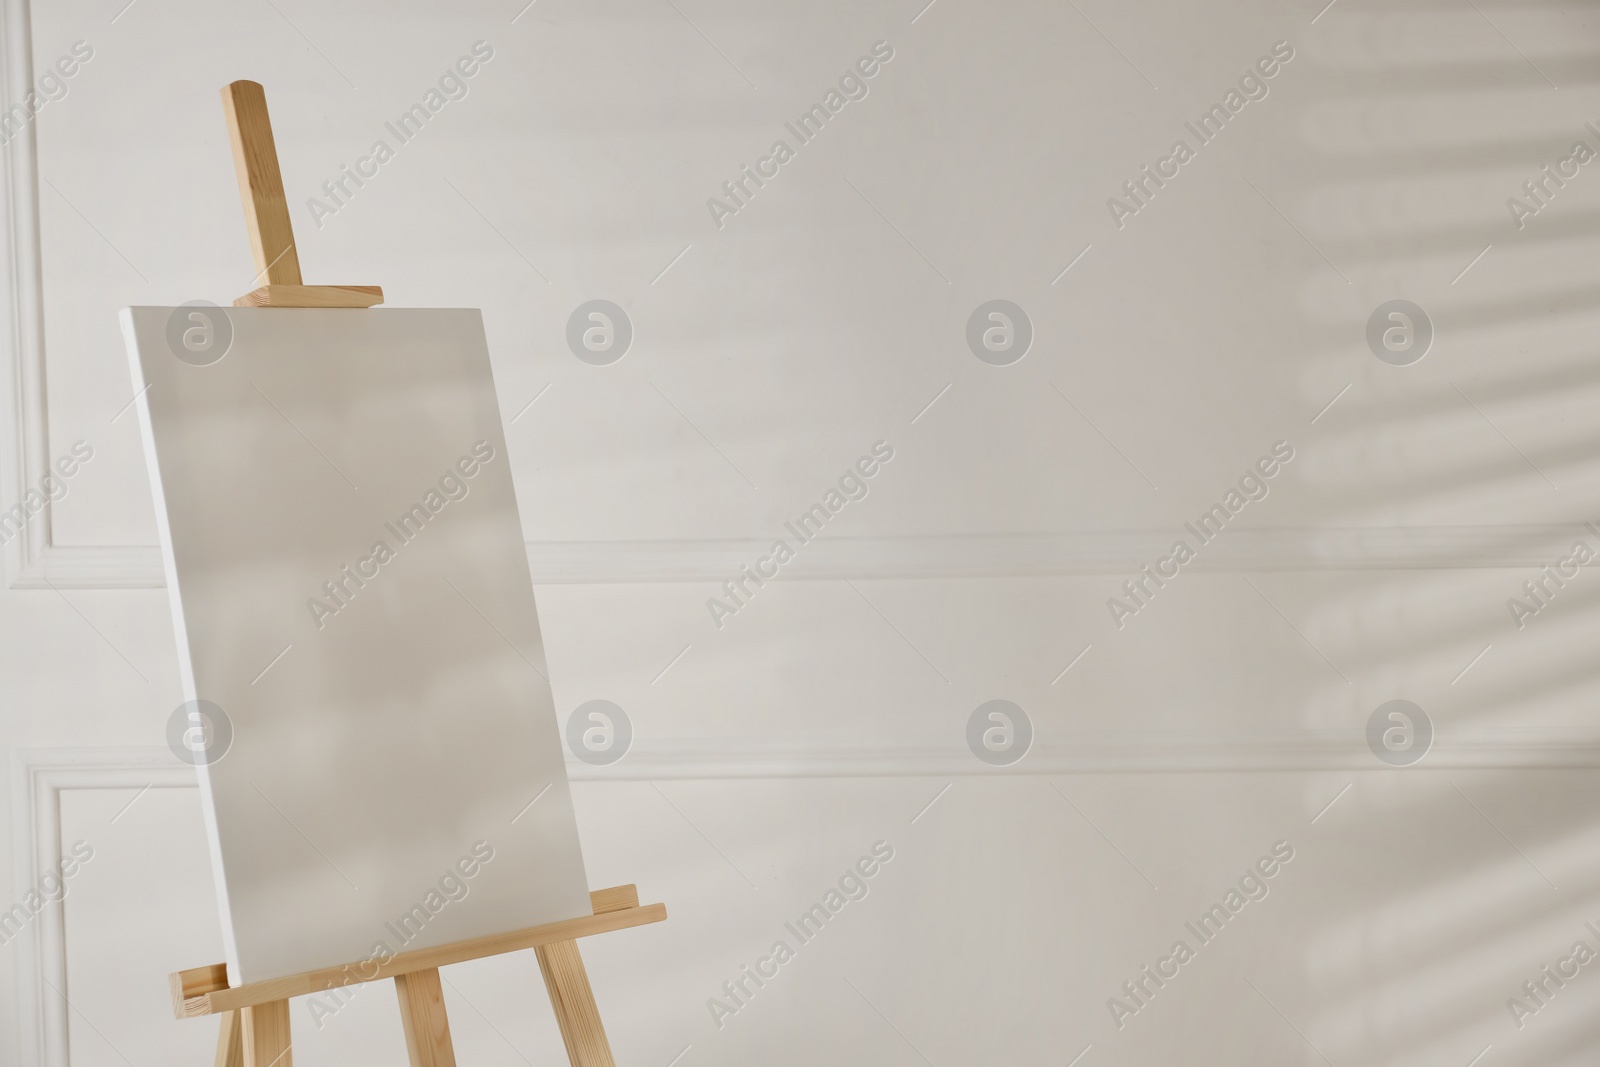 Photo of Wooden easel with blank canvas on light background. Space for text